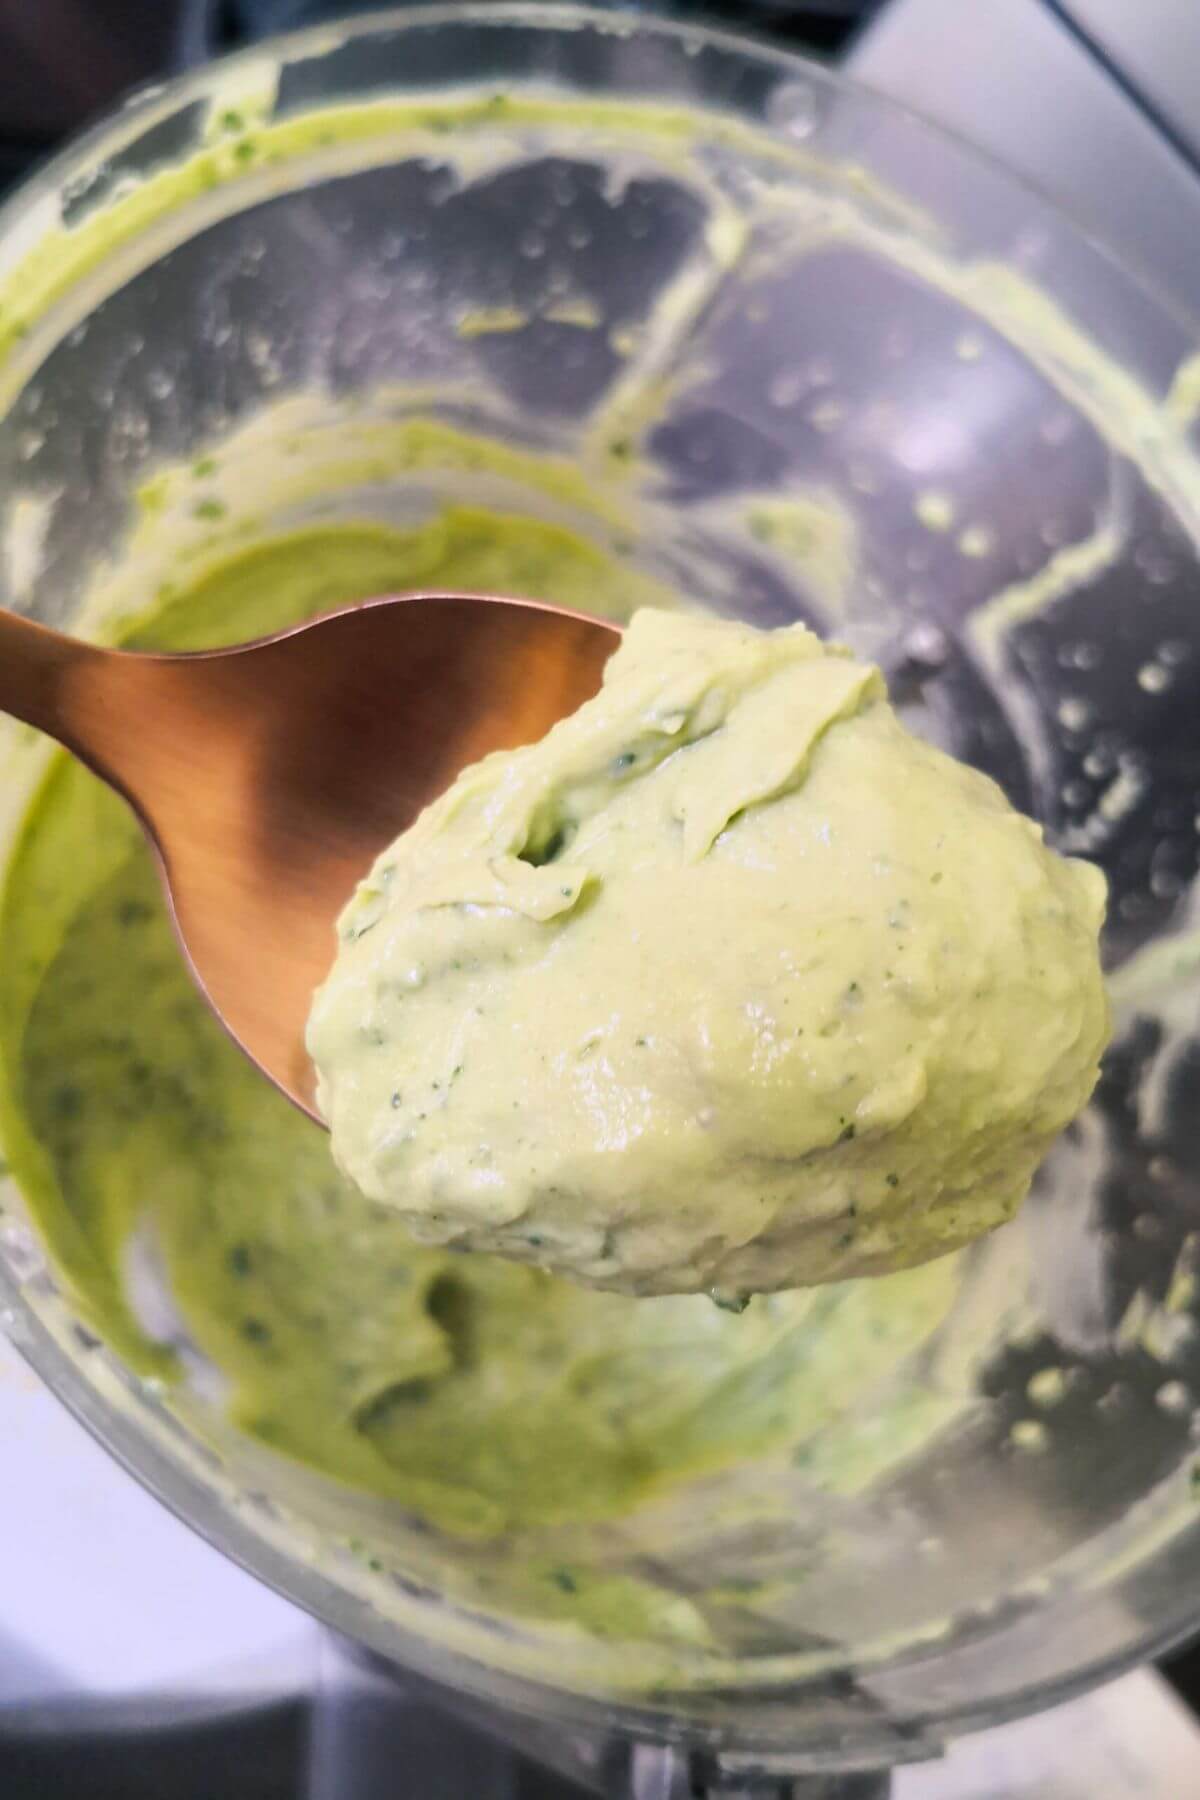 Close up of spoon with green tahini on it, with food processor bowl in the background.